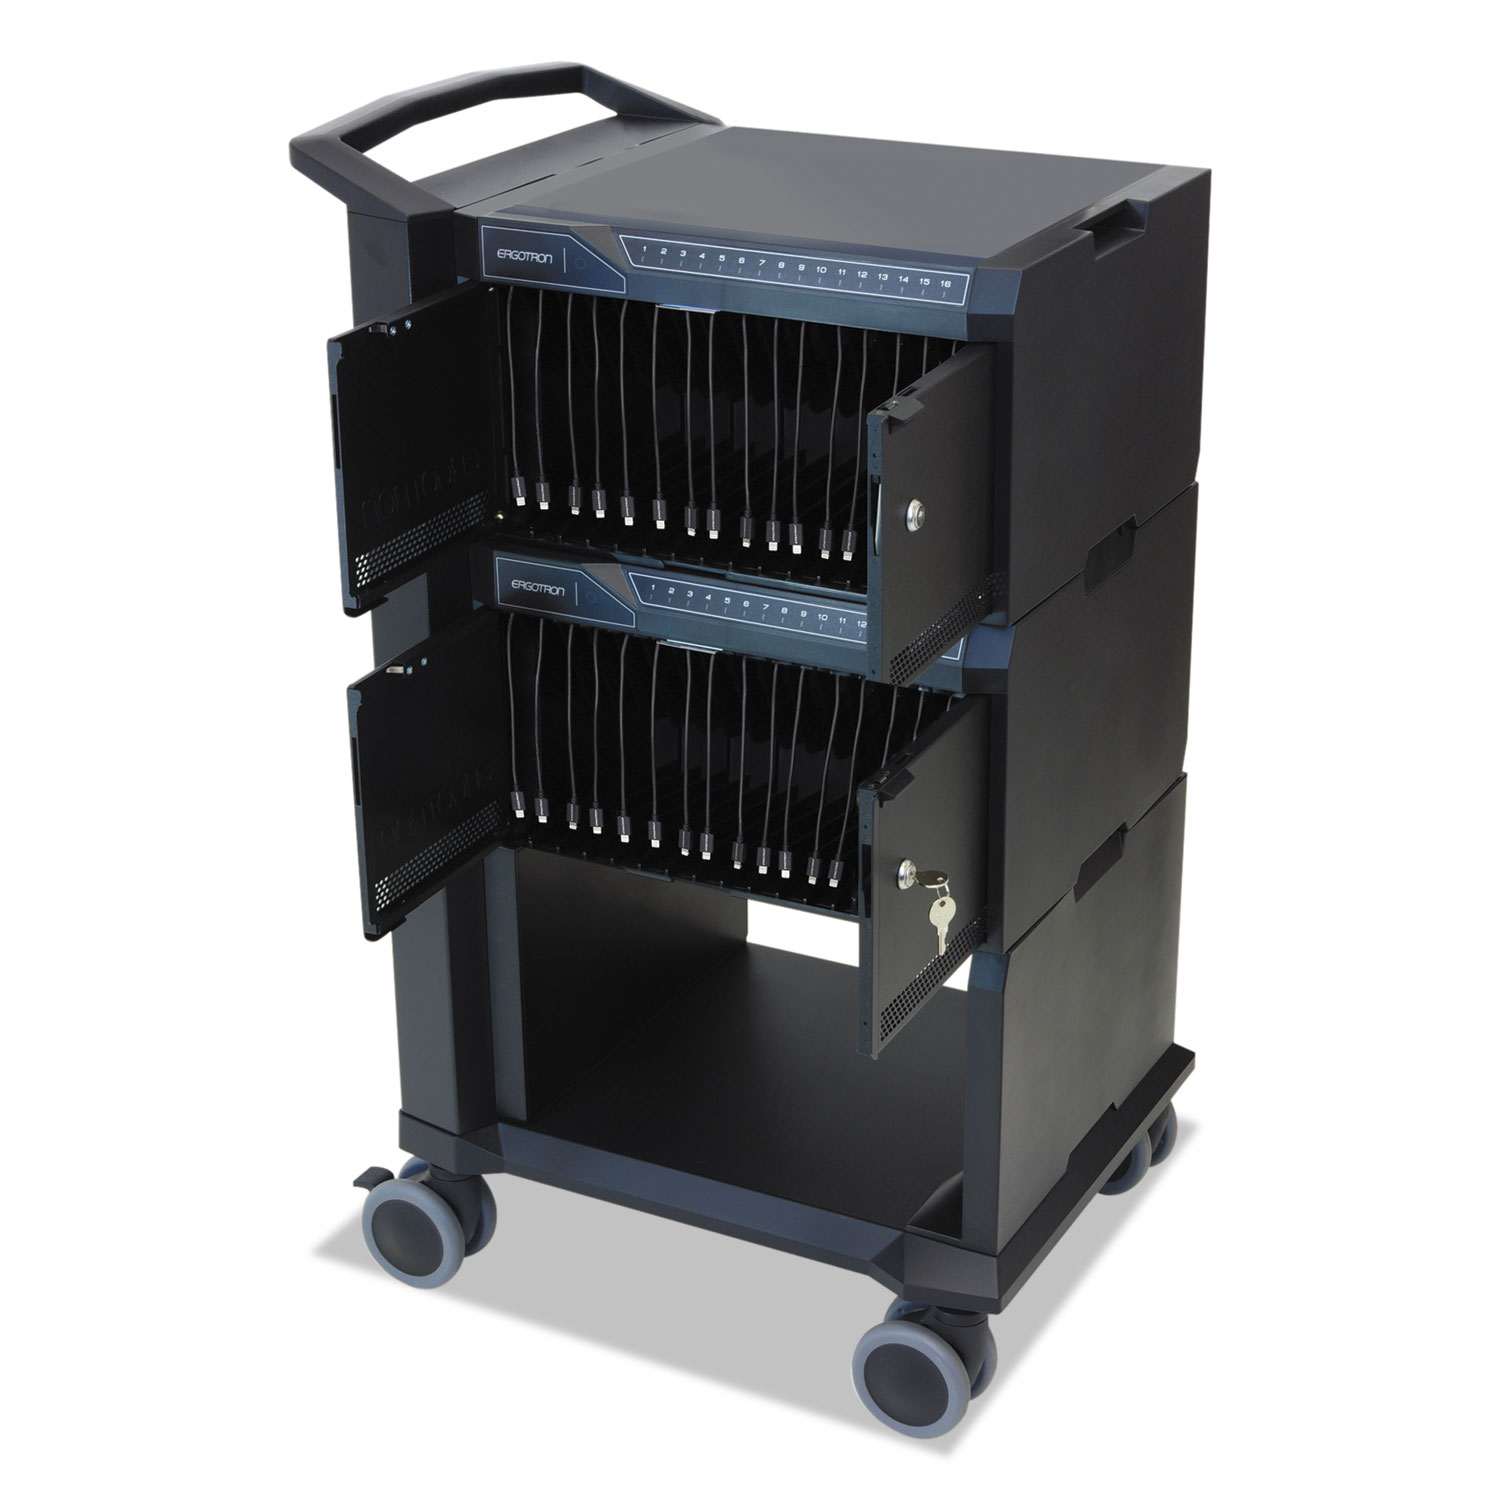  Ergotron DM32-1004-1 Tablet Management Cart with ISI for 32 Devices, 24 1/4 x 18 3/4 x 39 3/4, Black (ERGDM3210041) 